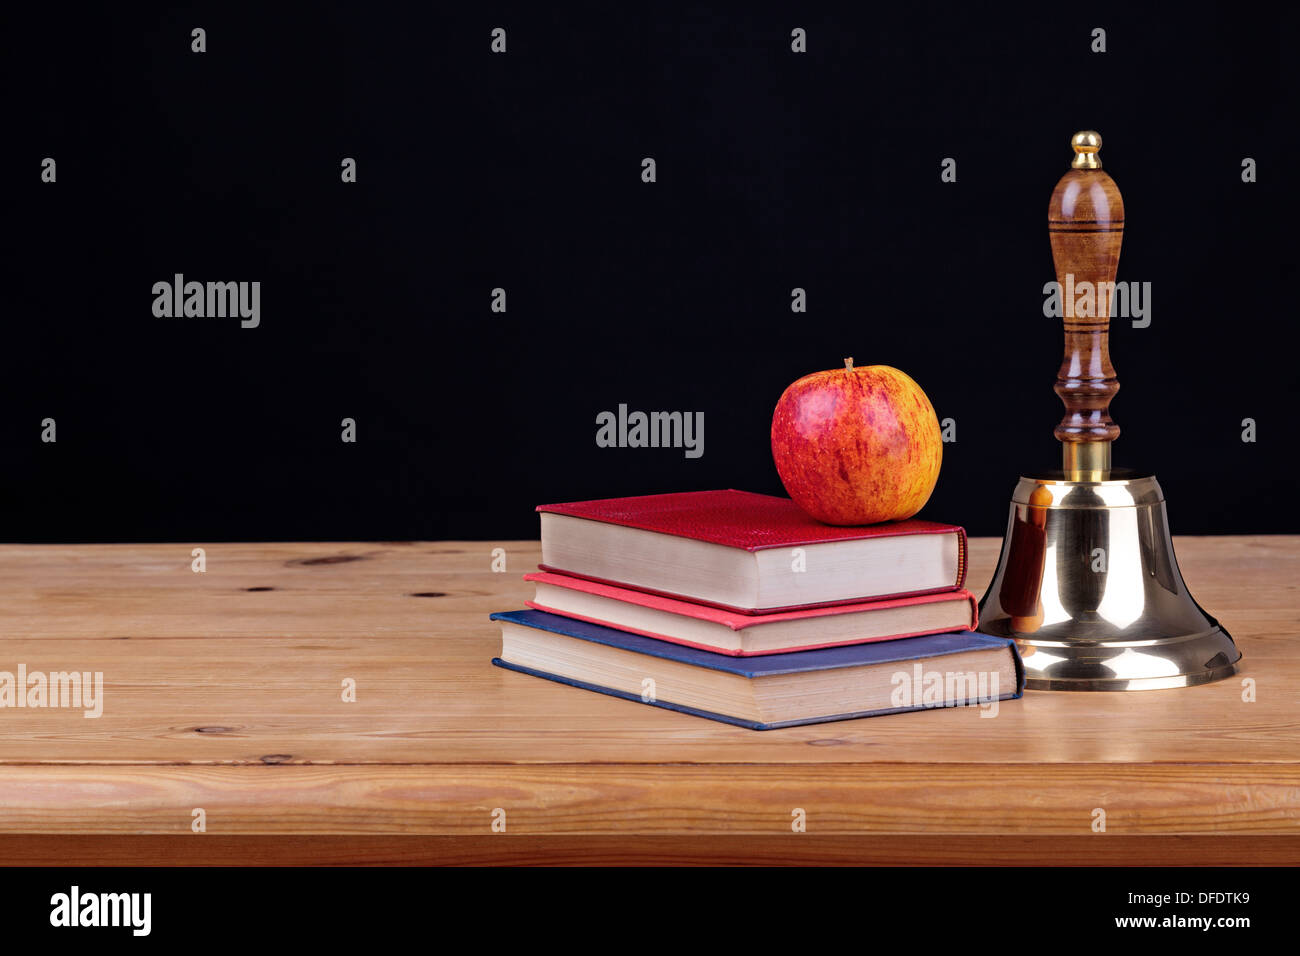 School desk with books and against a black background, add you own text. Stock Photo